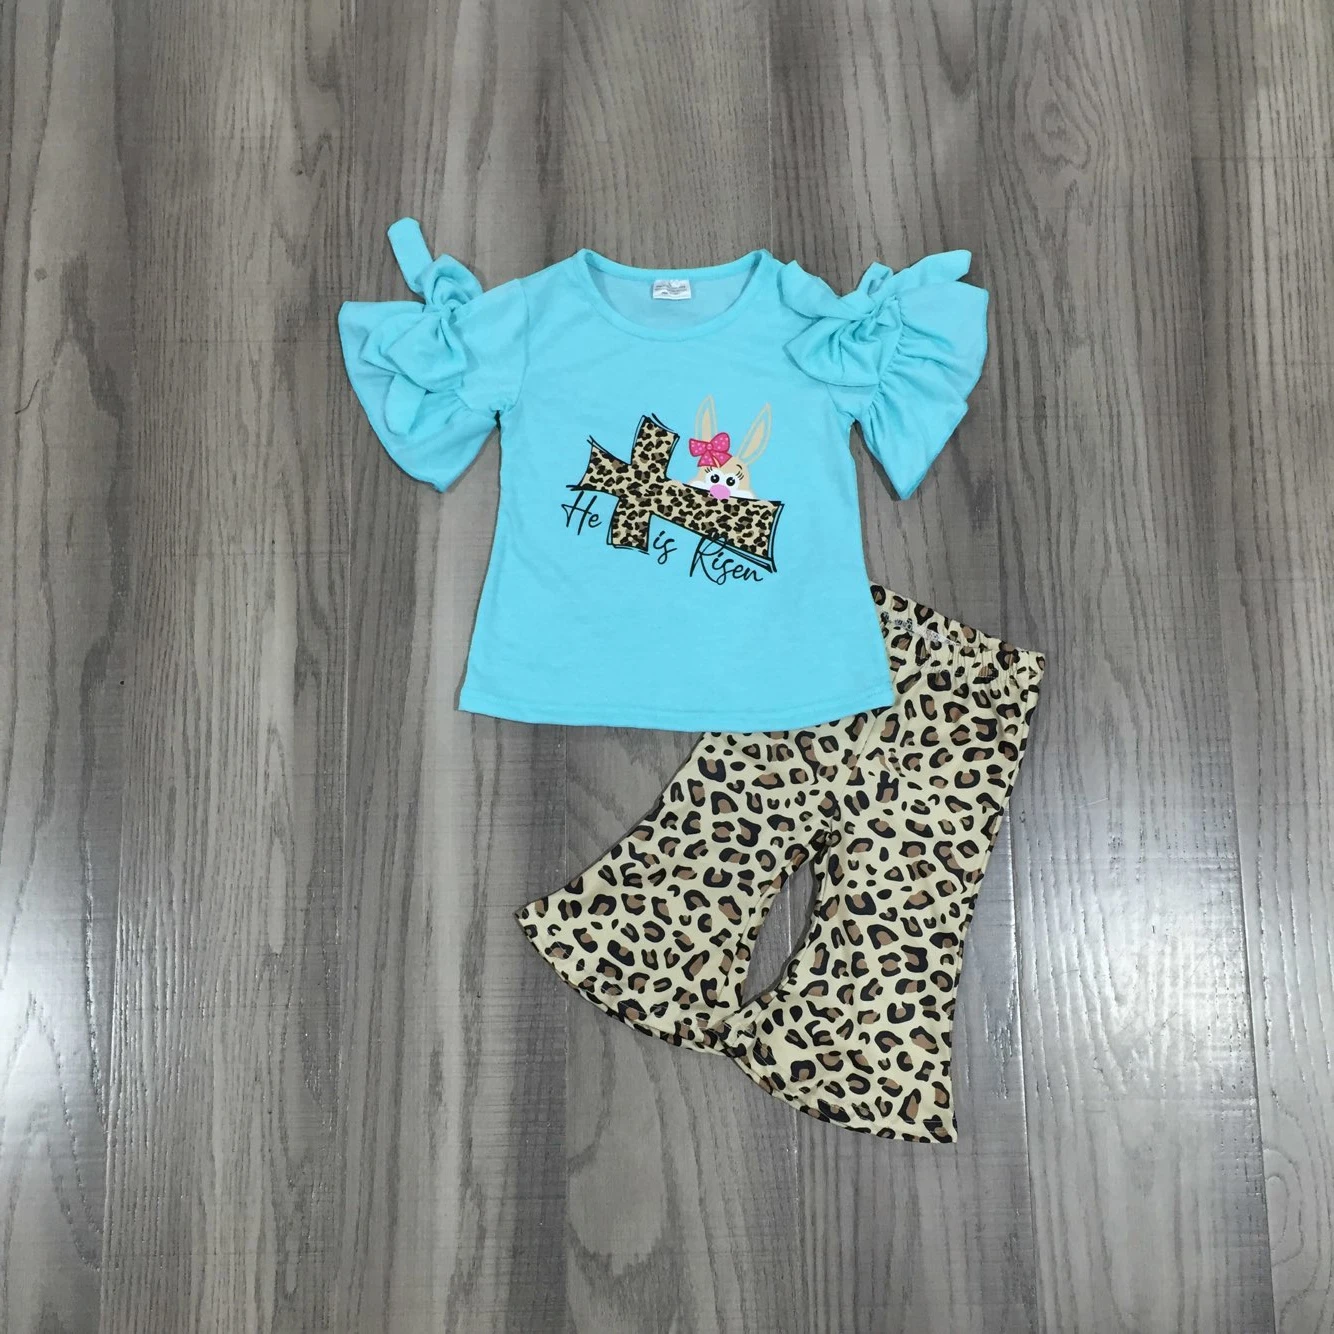 Girlymax Boutique Fashion Ruffle Sleeve Baby Top Shirt Leopard Pants Girl Children Wholesale Clothing